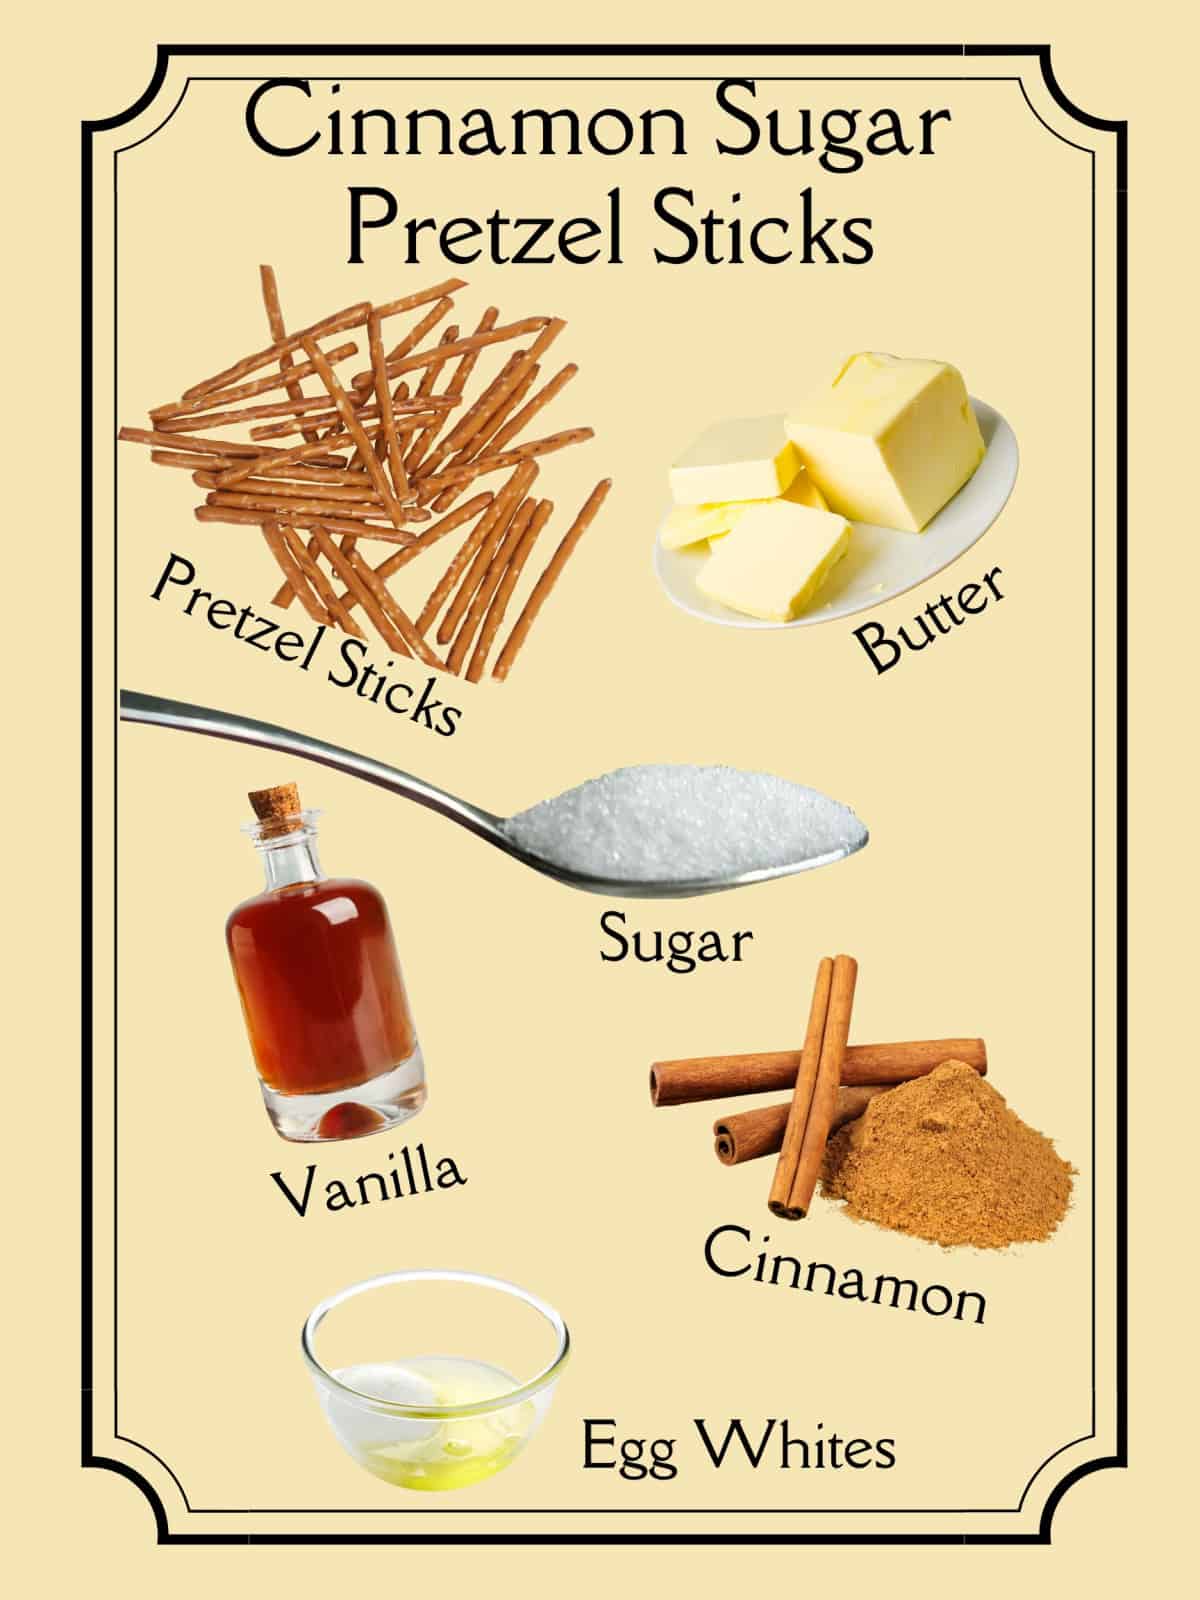 A list of ingredients featuring images for making Cinnamon Sugar Pretzel Sticks.